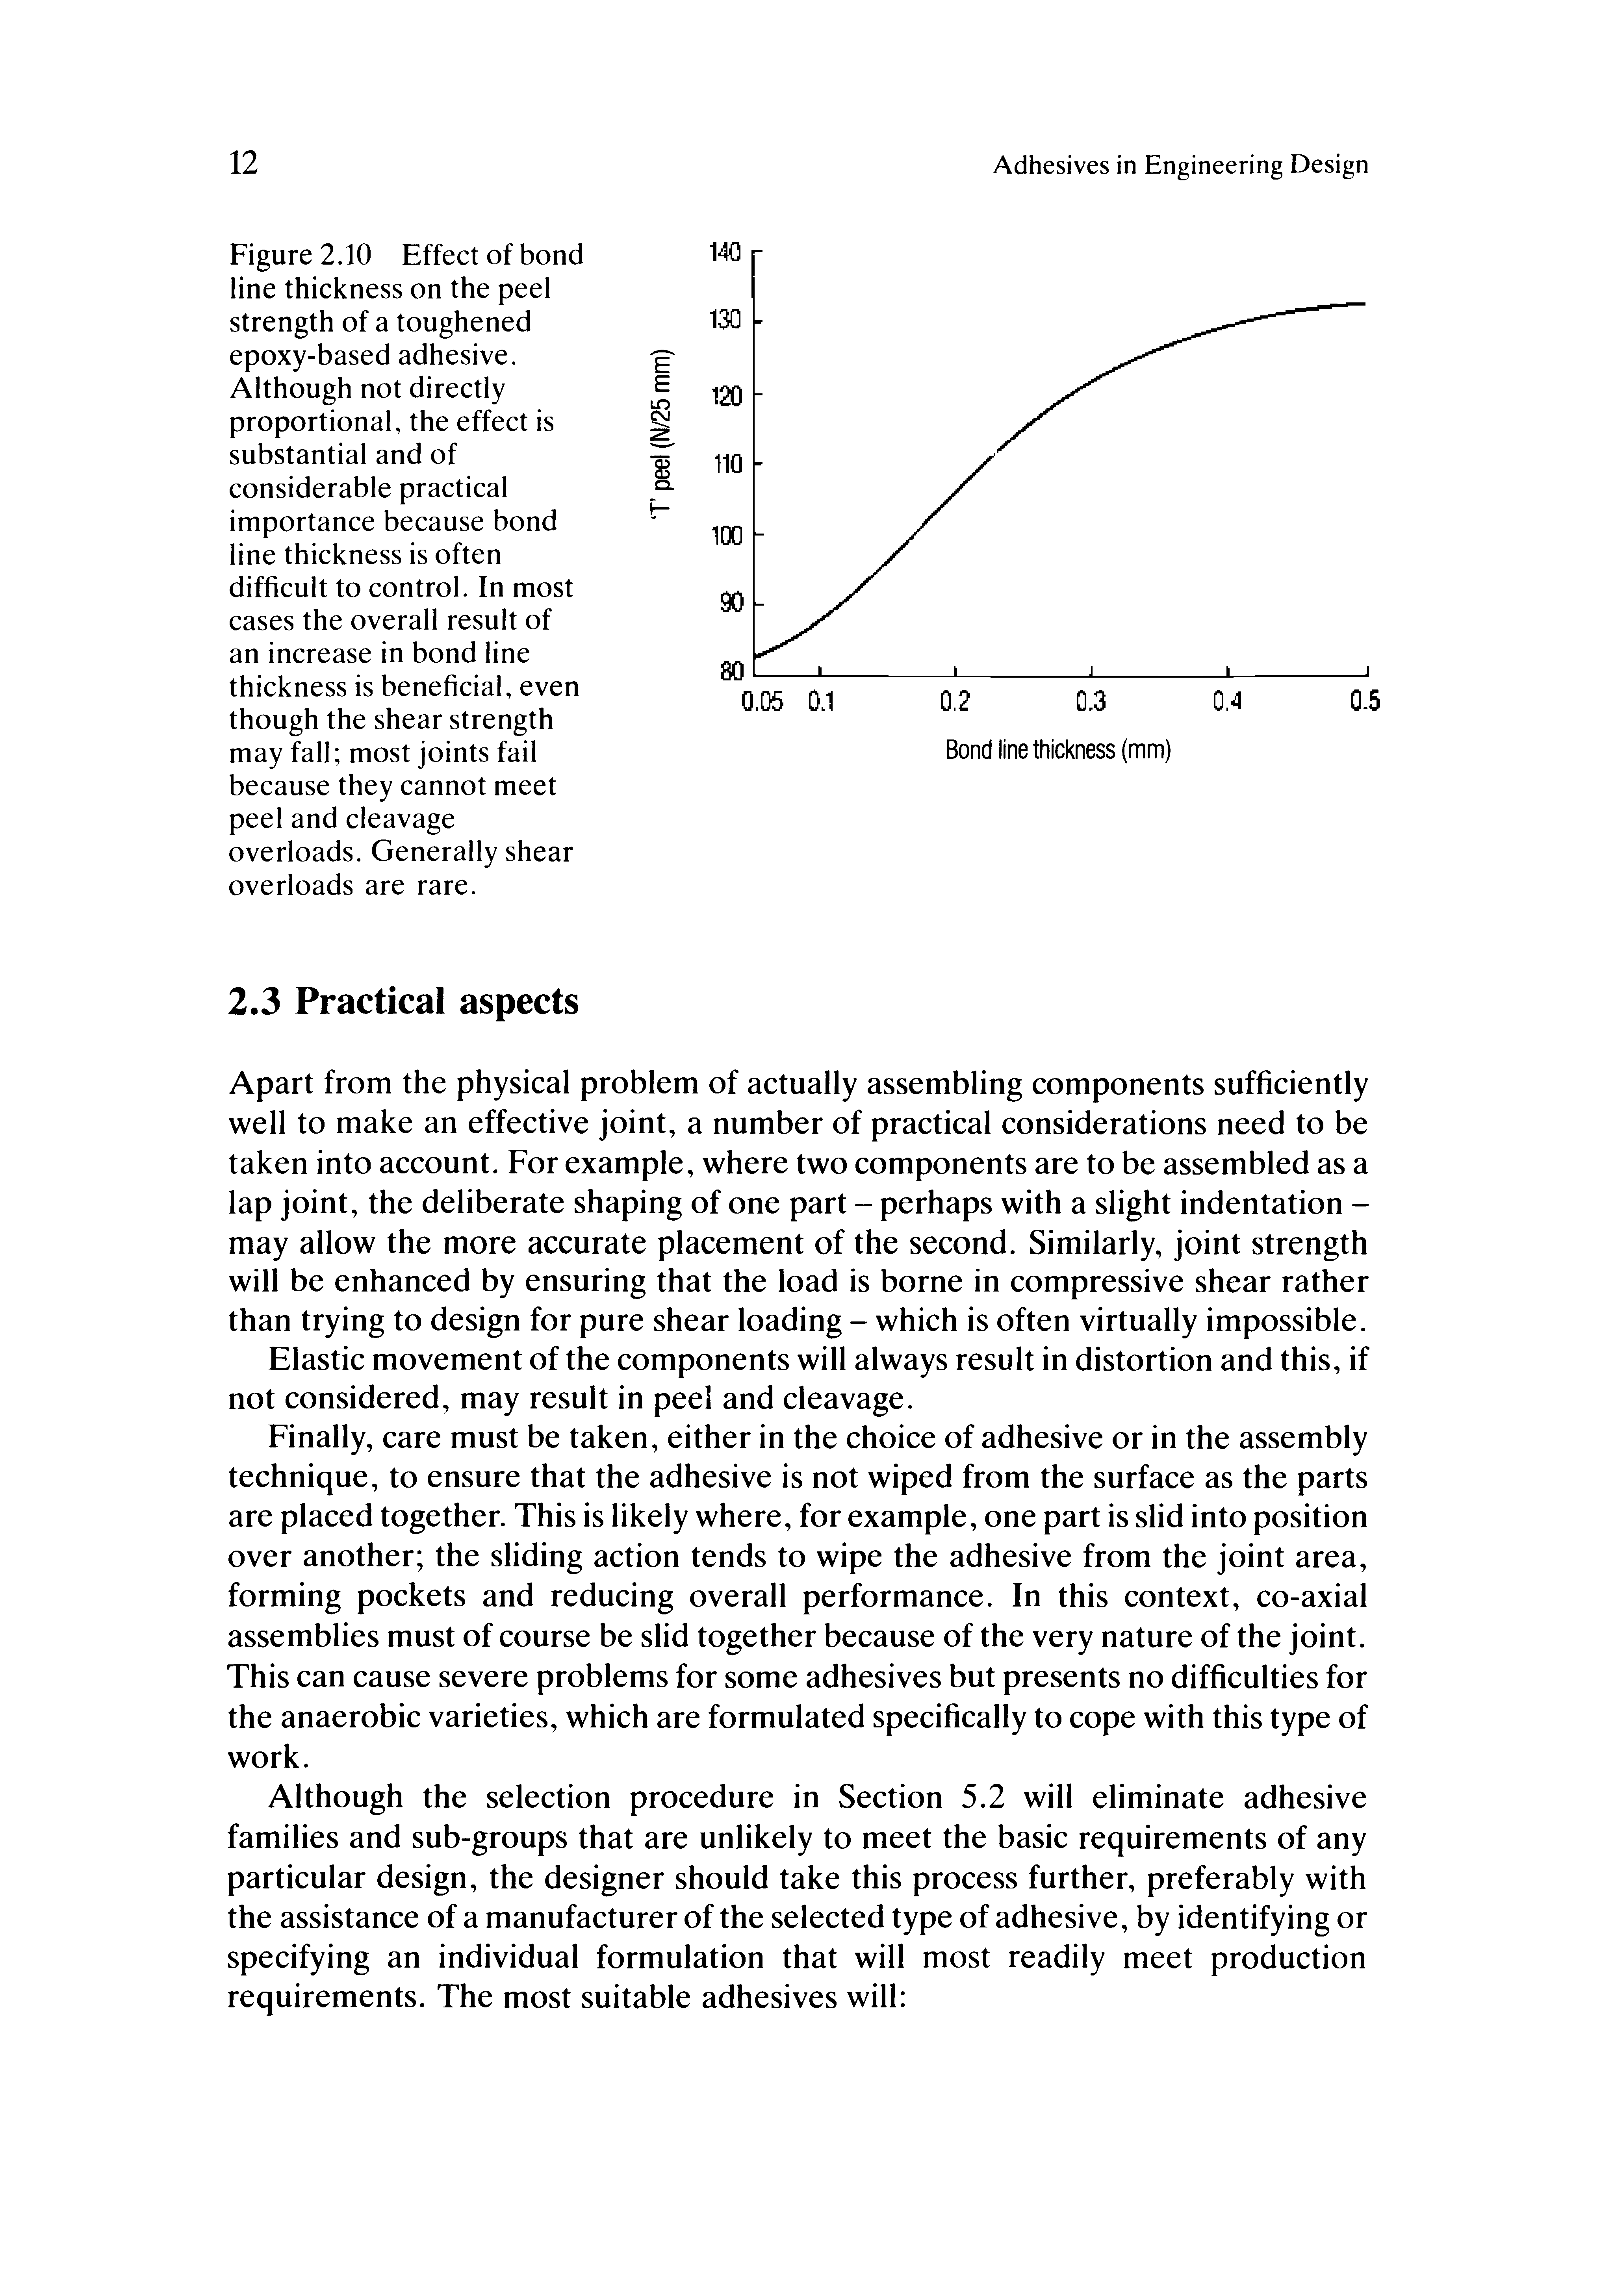 Figure 2.10 Effect of bond line thickness on the peel strength of a toughened epoxy-based adhesive. Although not directly proportional, the effect is substantial and of considerable practical importance because bond line thickness is often difficult to control. In most cases the overall result of an increase in bond line thickness is beneficial, even though the shear strength may fall most joints fail because they cannot meet peel and cleavage overloads. Generally shear overloads are rare.